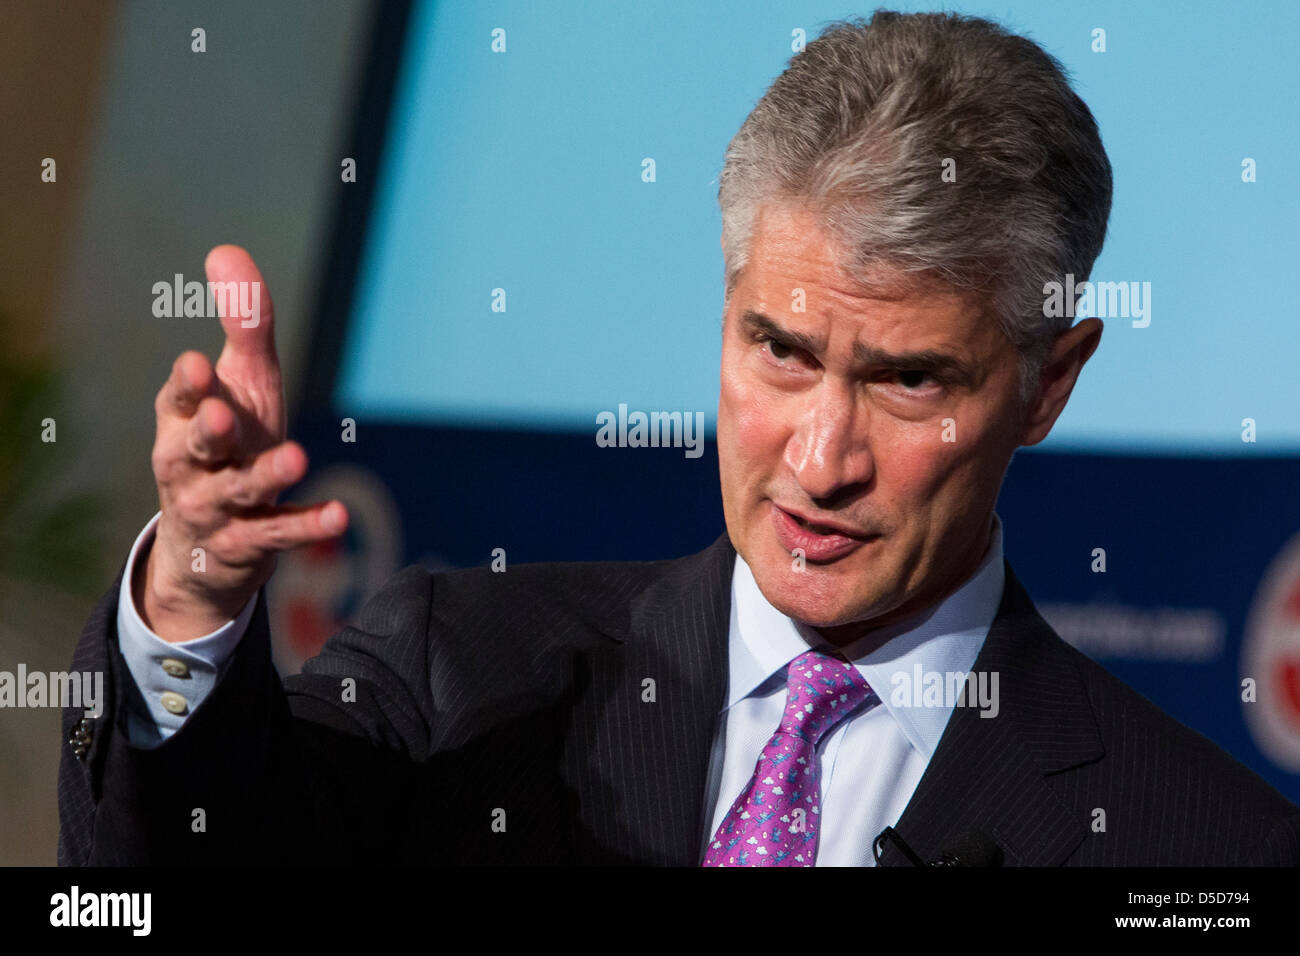 Jeffery A. Smisek, Chairman, President und Chief Executive Officer (CEO) von United Continental Holdings, Inc. Stockfoto